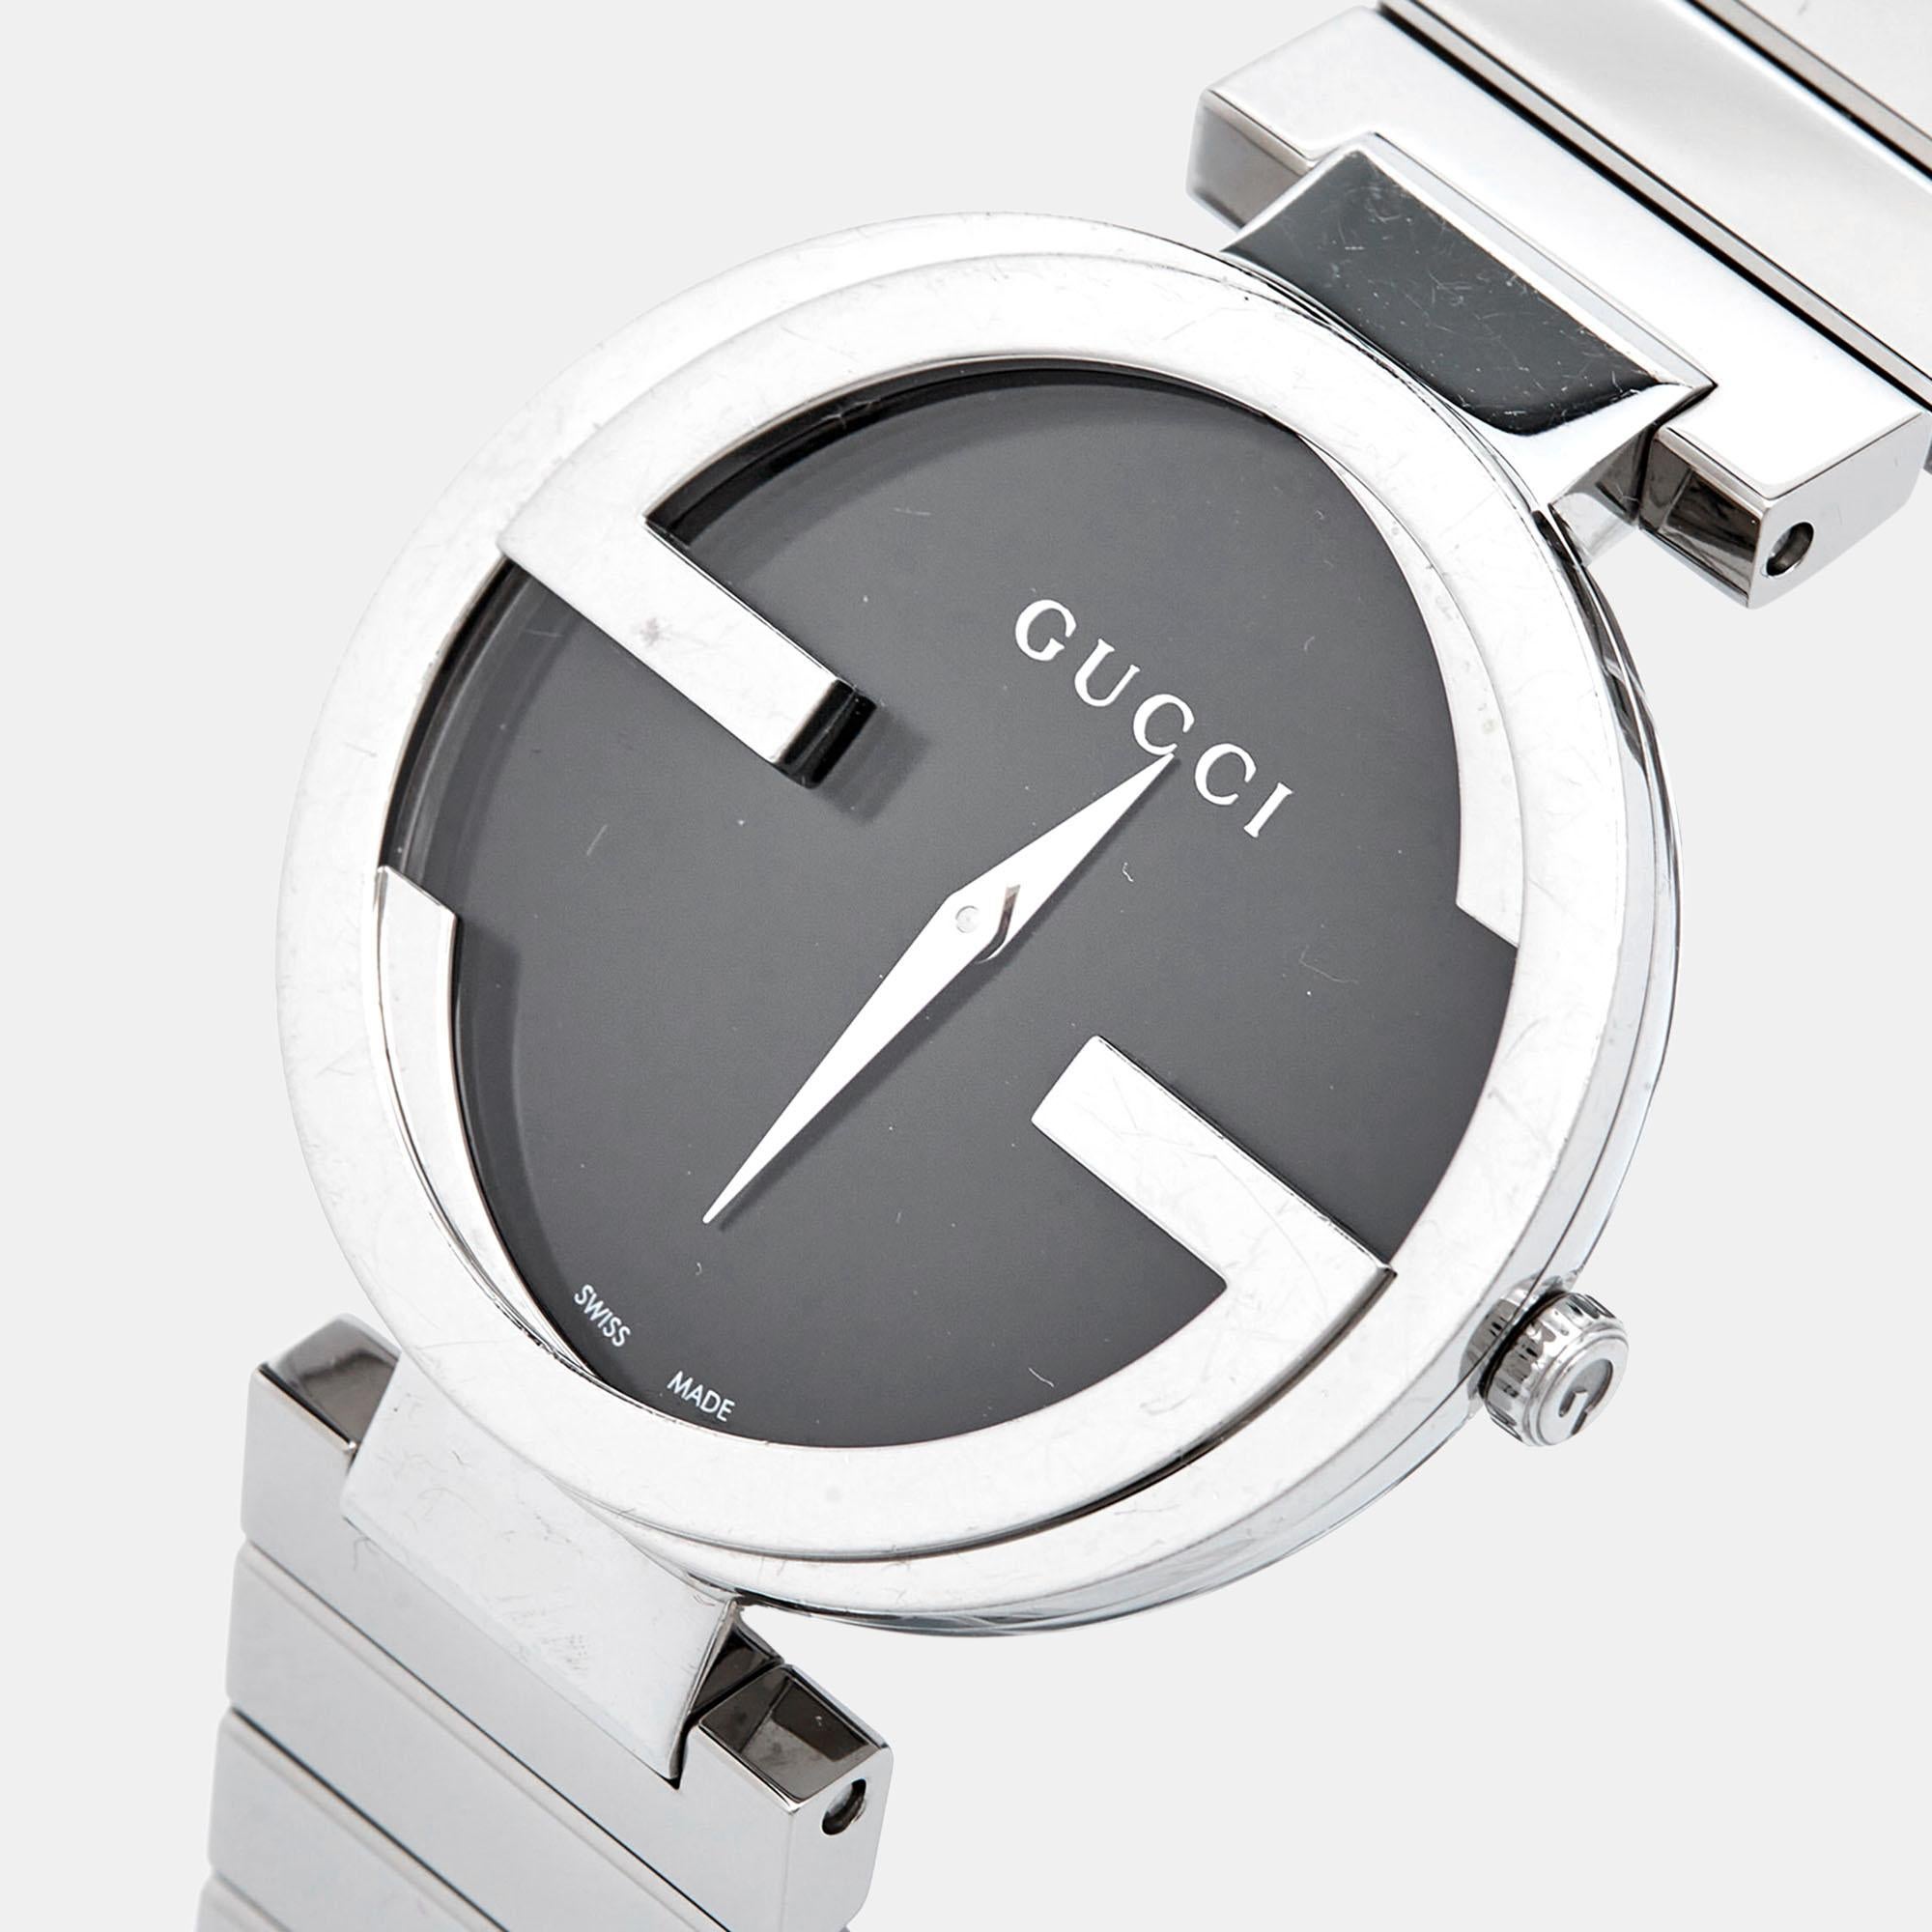 A timeless silhouette made of high-quality materials and packed with precision and luxury makes this Gucci wristwatch the perfect choice for a sophisticated finish to any look. It is a grand creation to elevate the everyday experience.

Includes
2